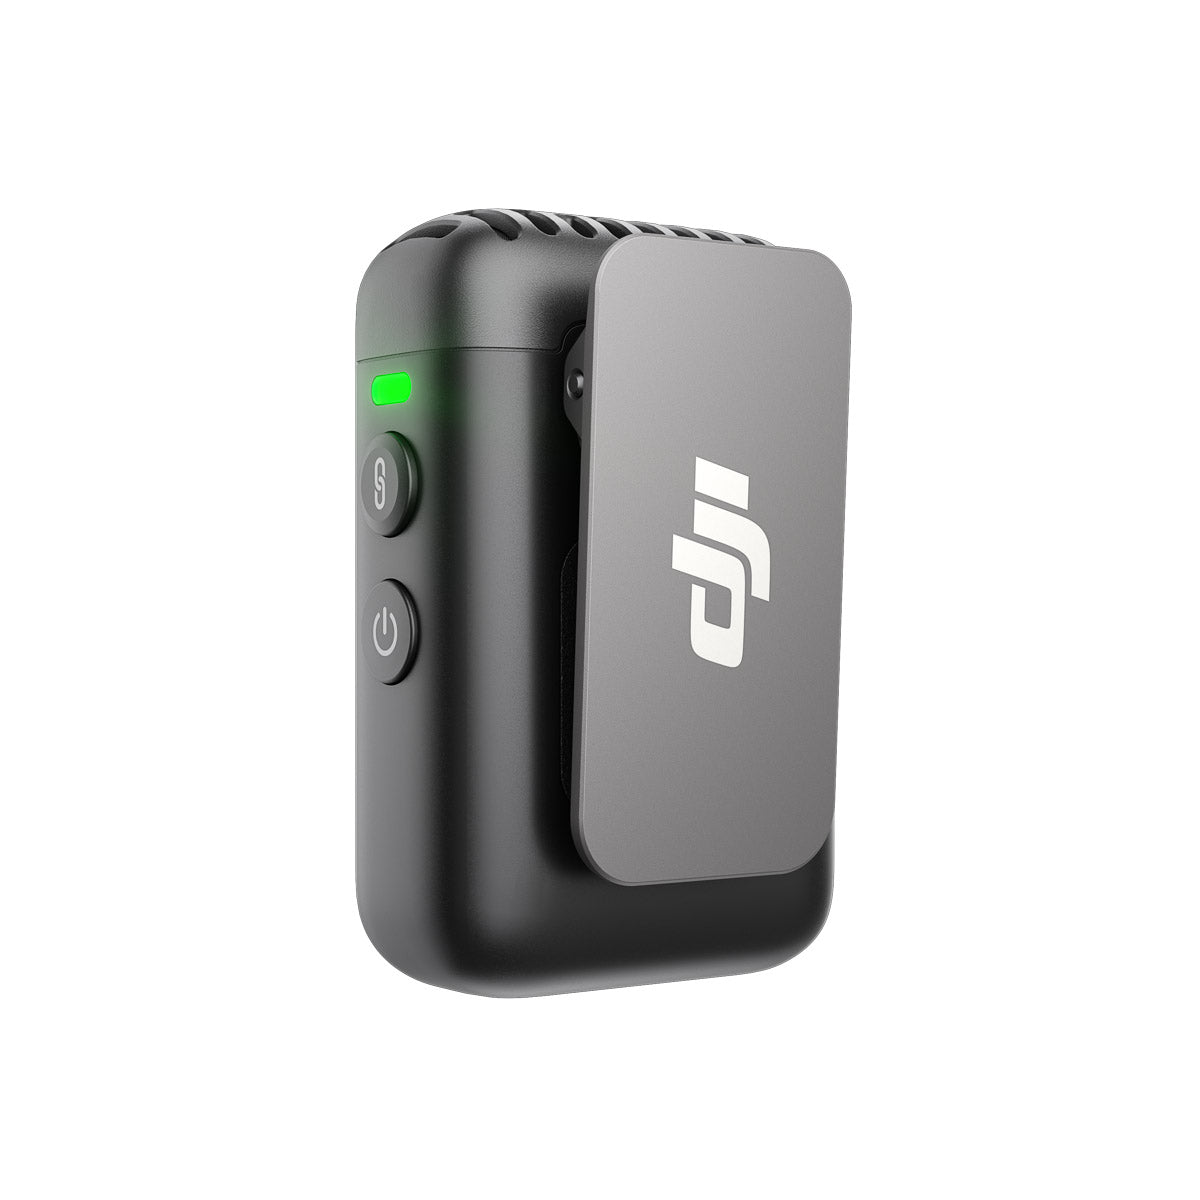 DJI Mic 2 Transmitter/Recorder with Built-In Microphone (Shadow Black)